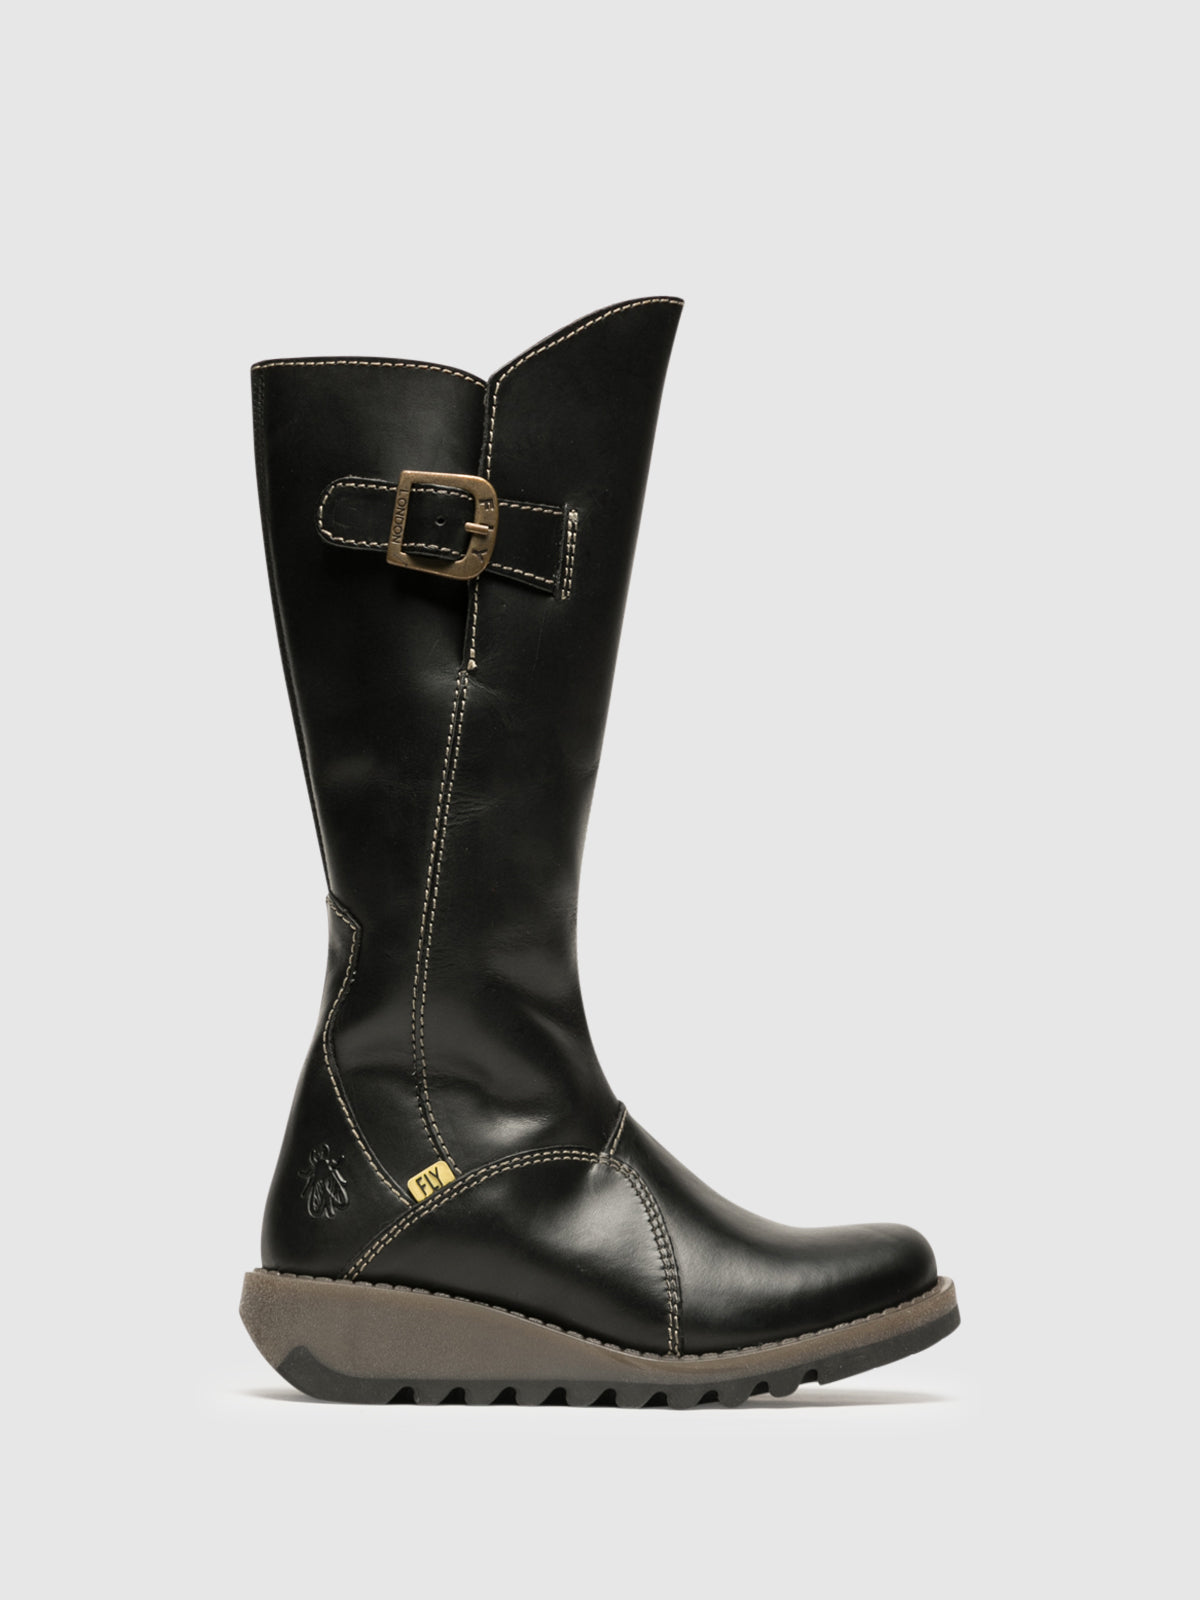 Fly London Black Buckle Boots